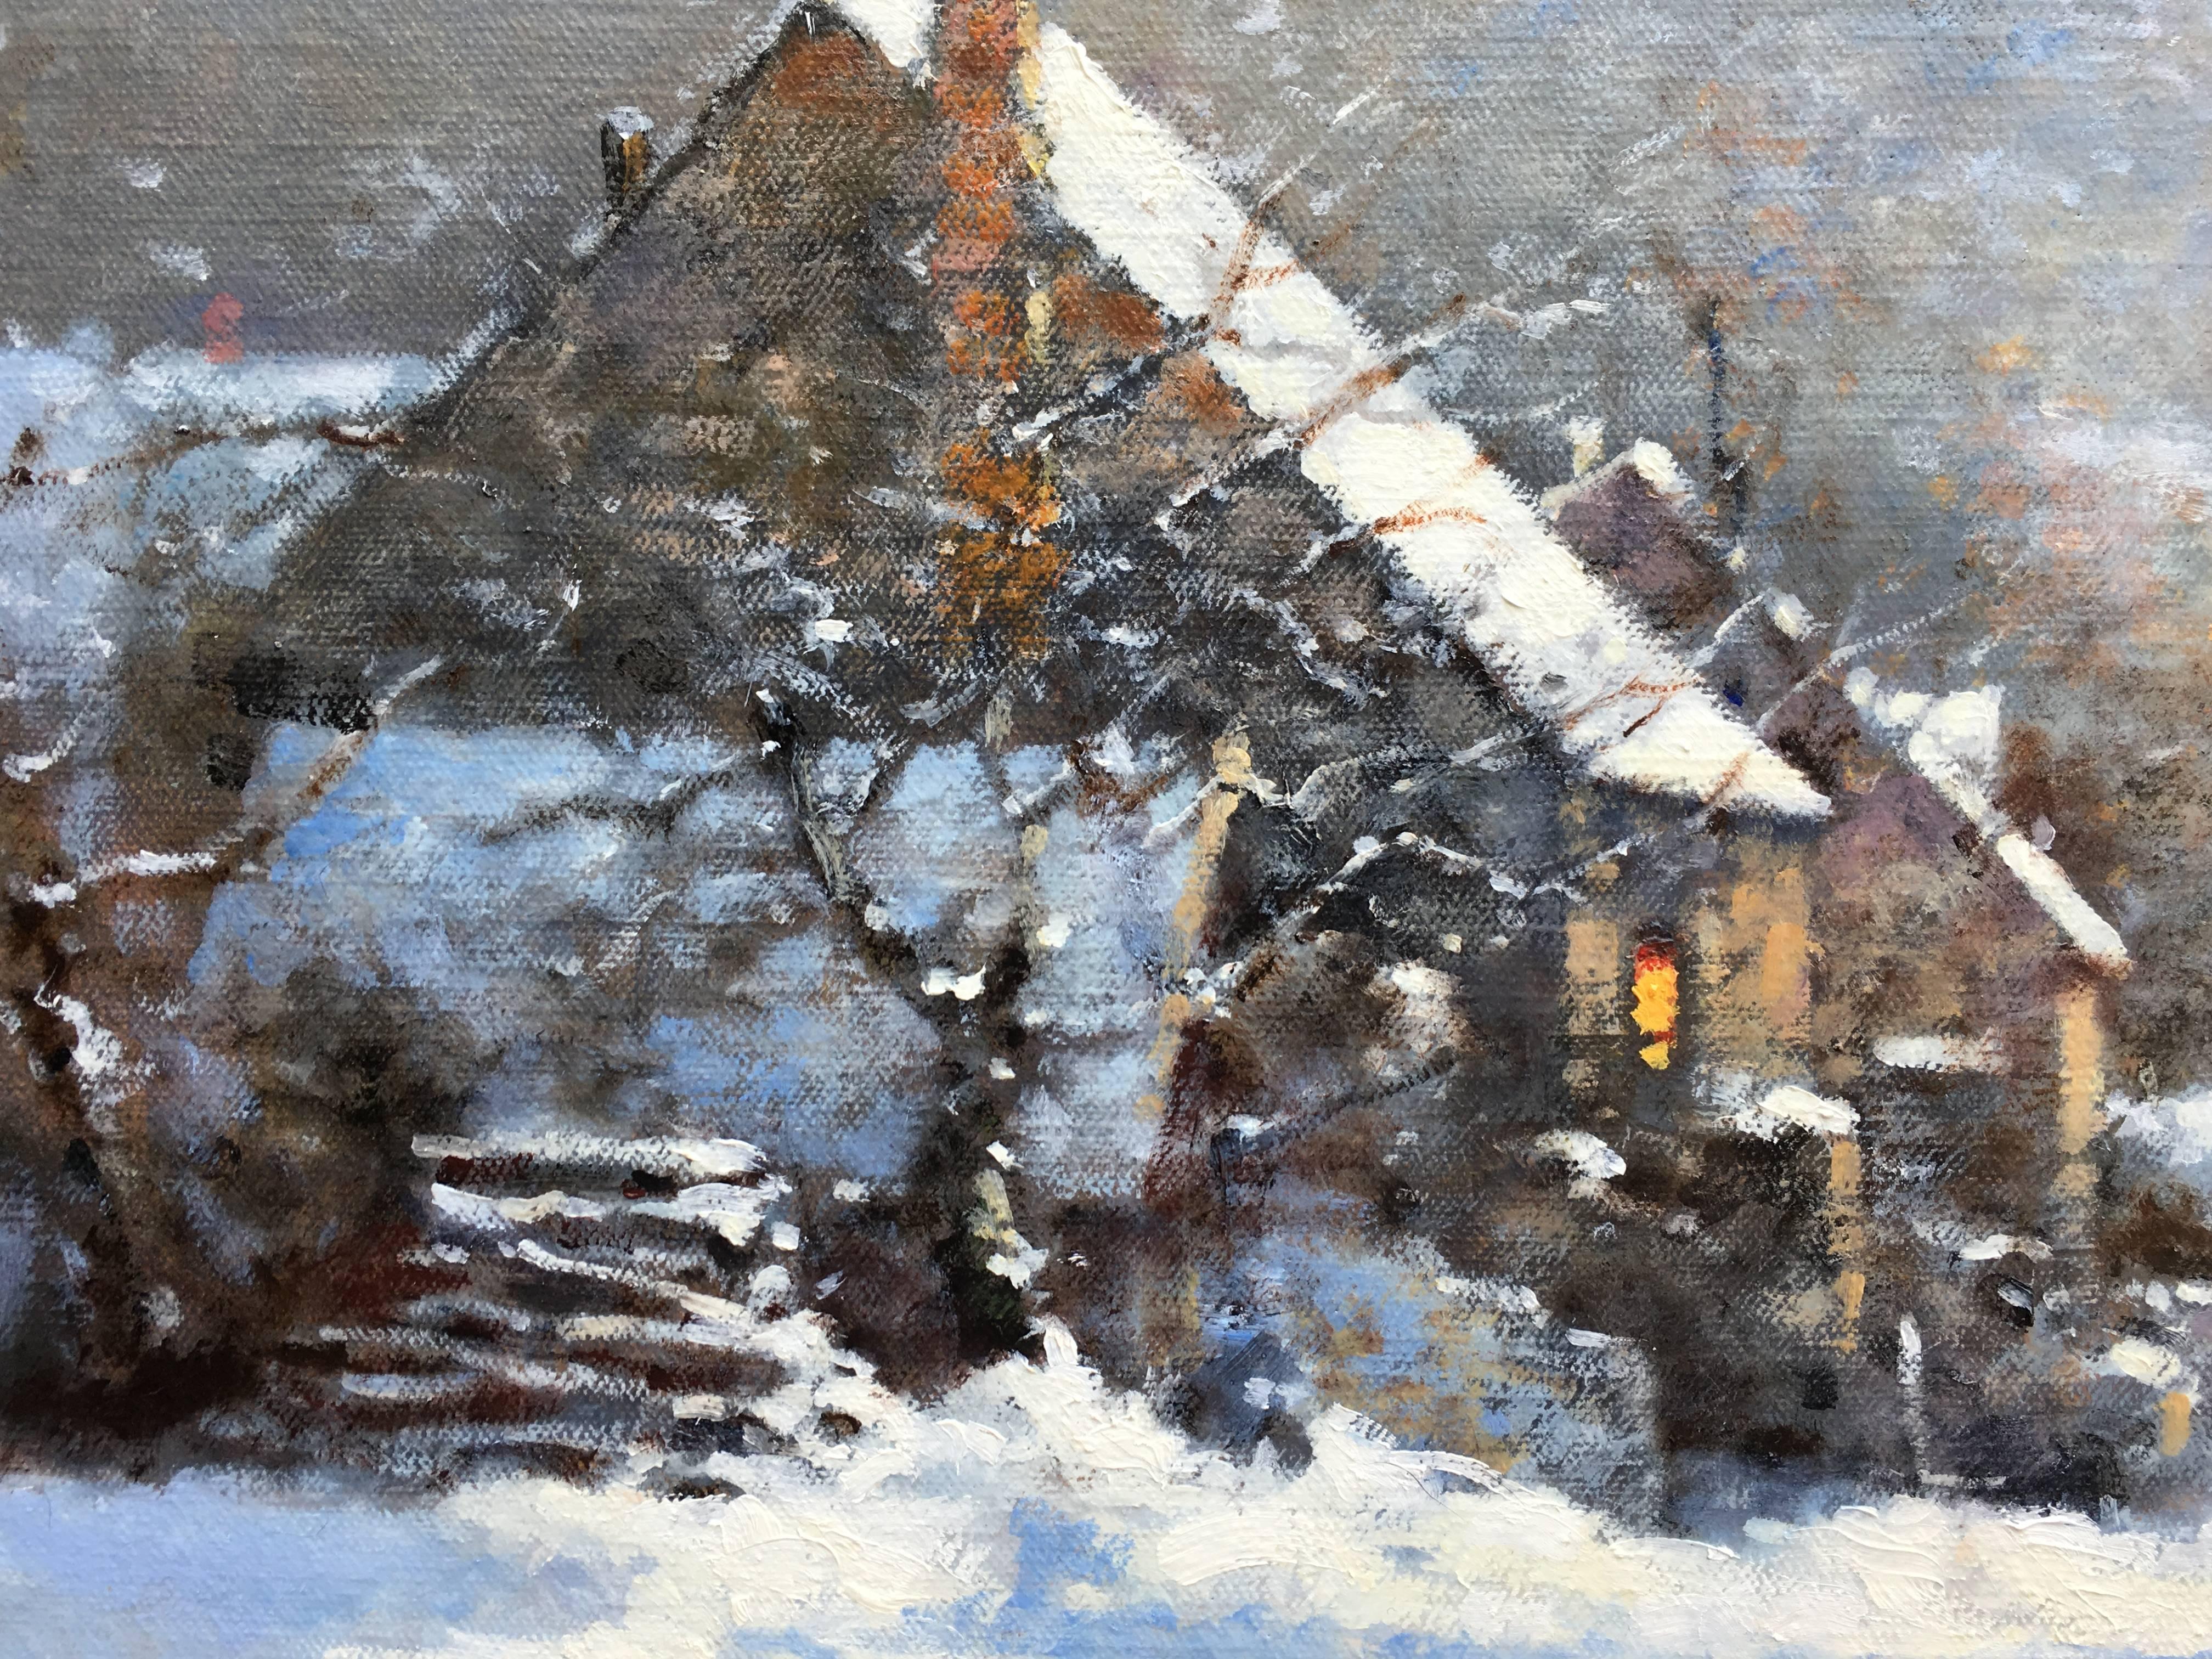 Old farm in winter, French landscape postimpressionist style - Painting by David Garcia